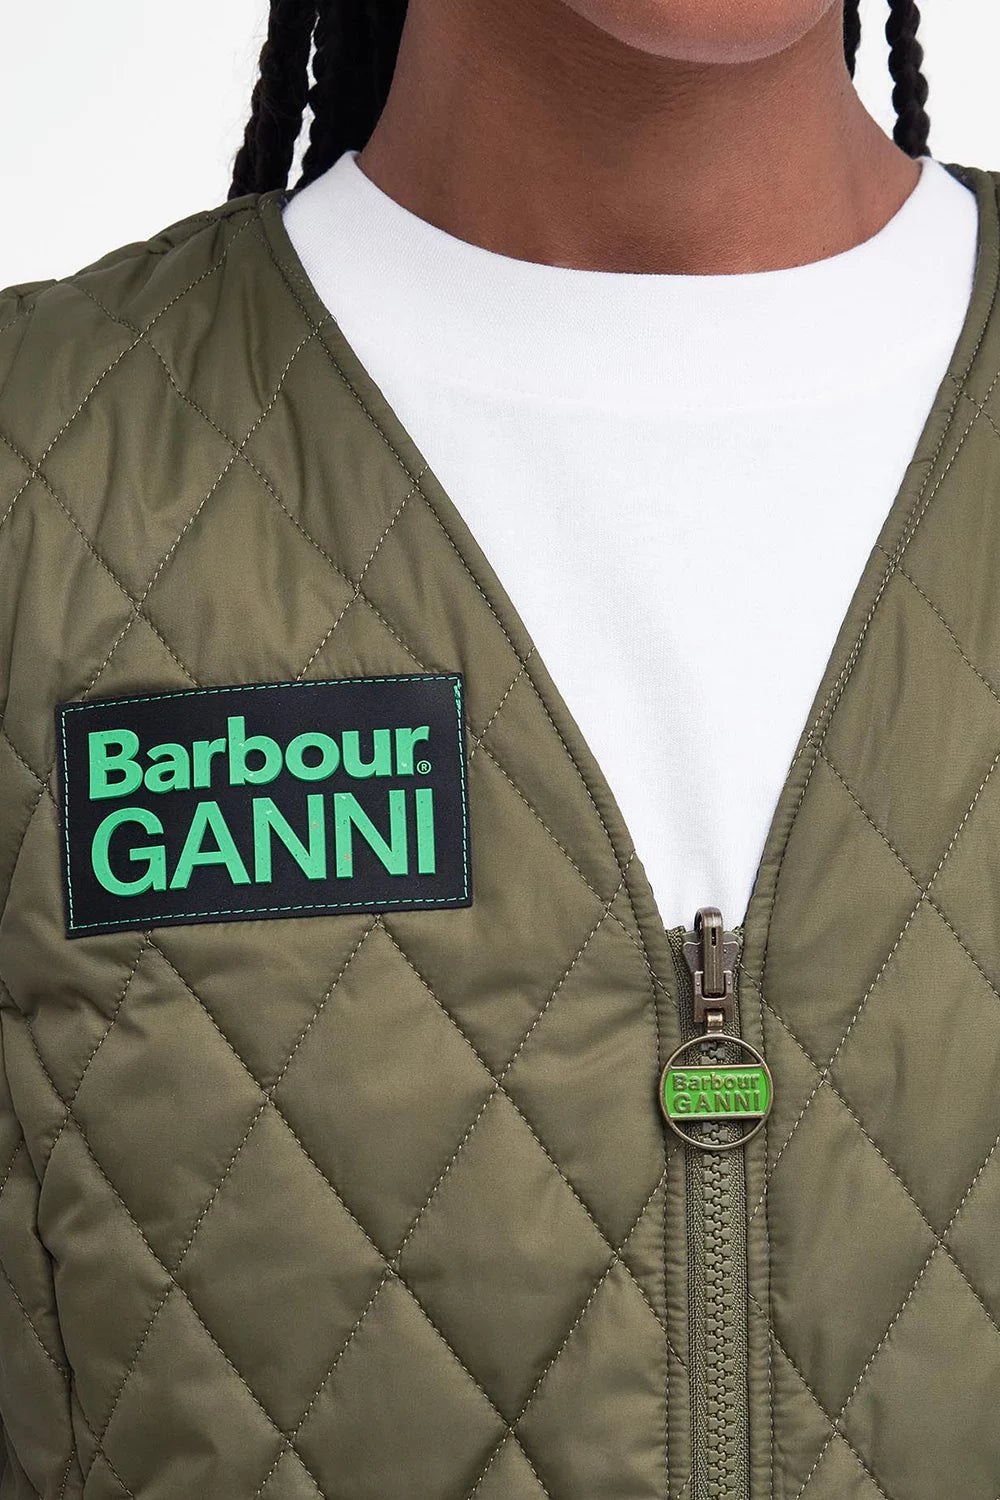    Barbour-GANNI-Reversible-Betty-Liner-Fern-Classic